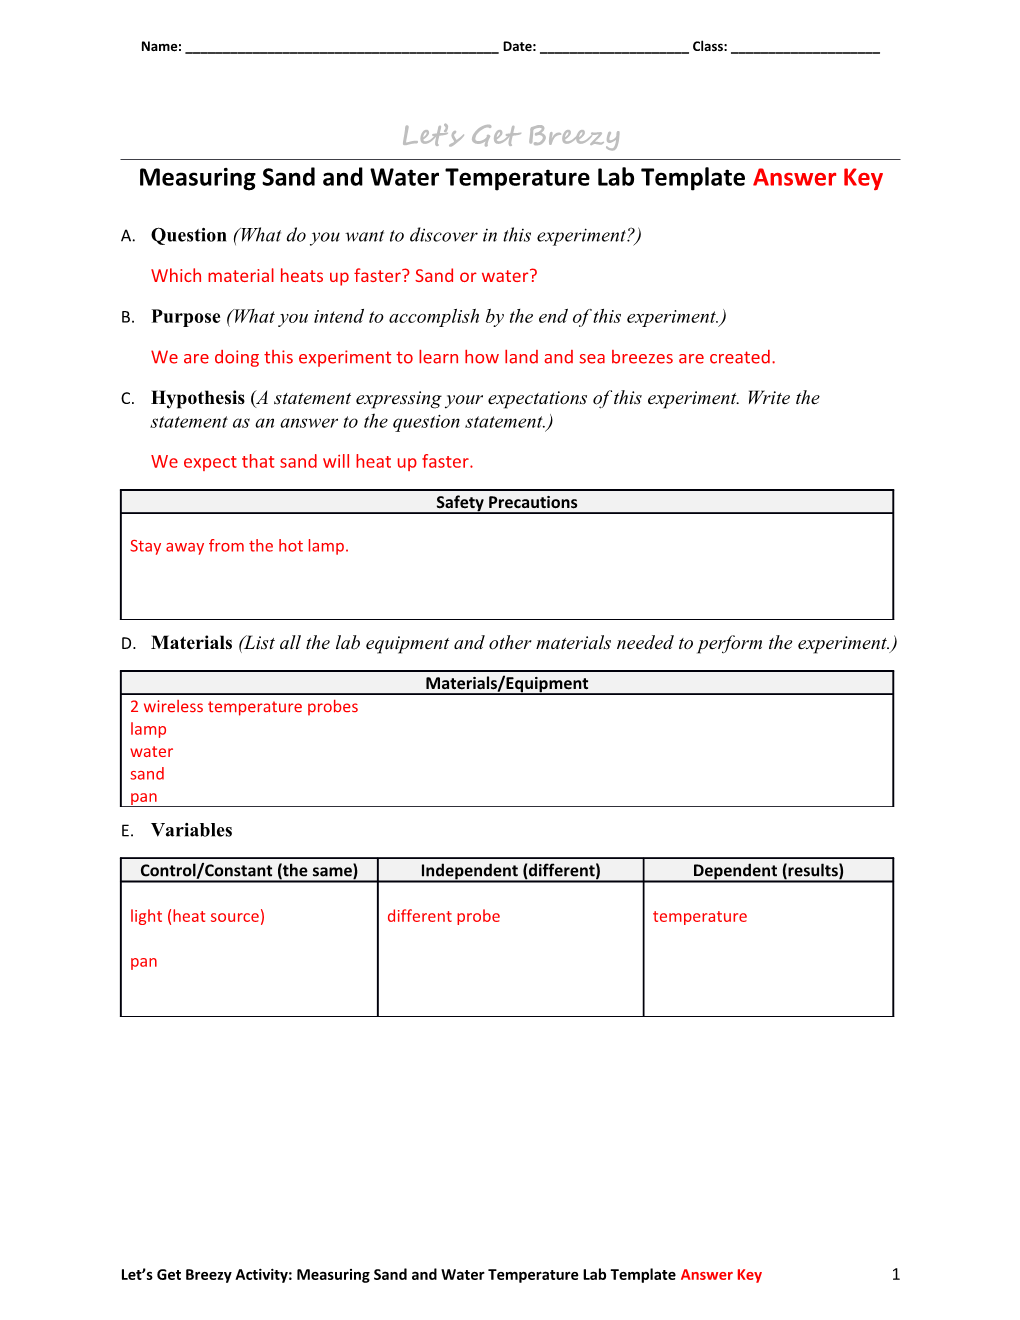 Measuring Sand and Water Temperature Lab Template Answer Key